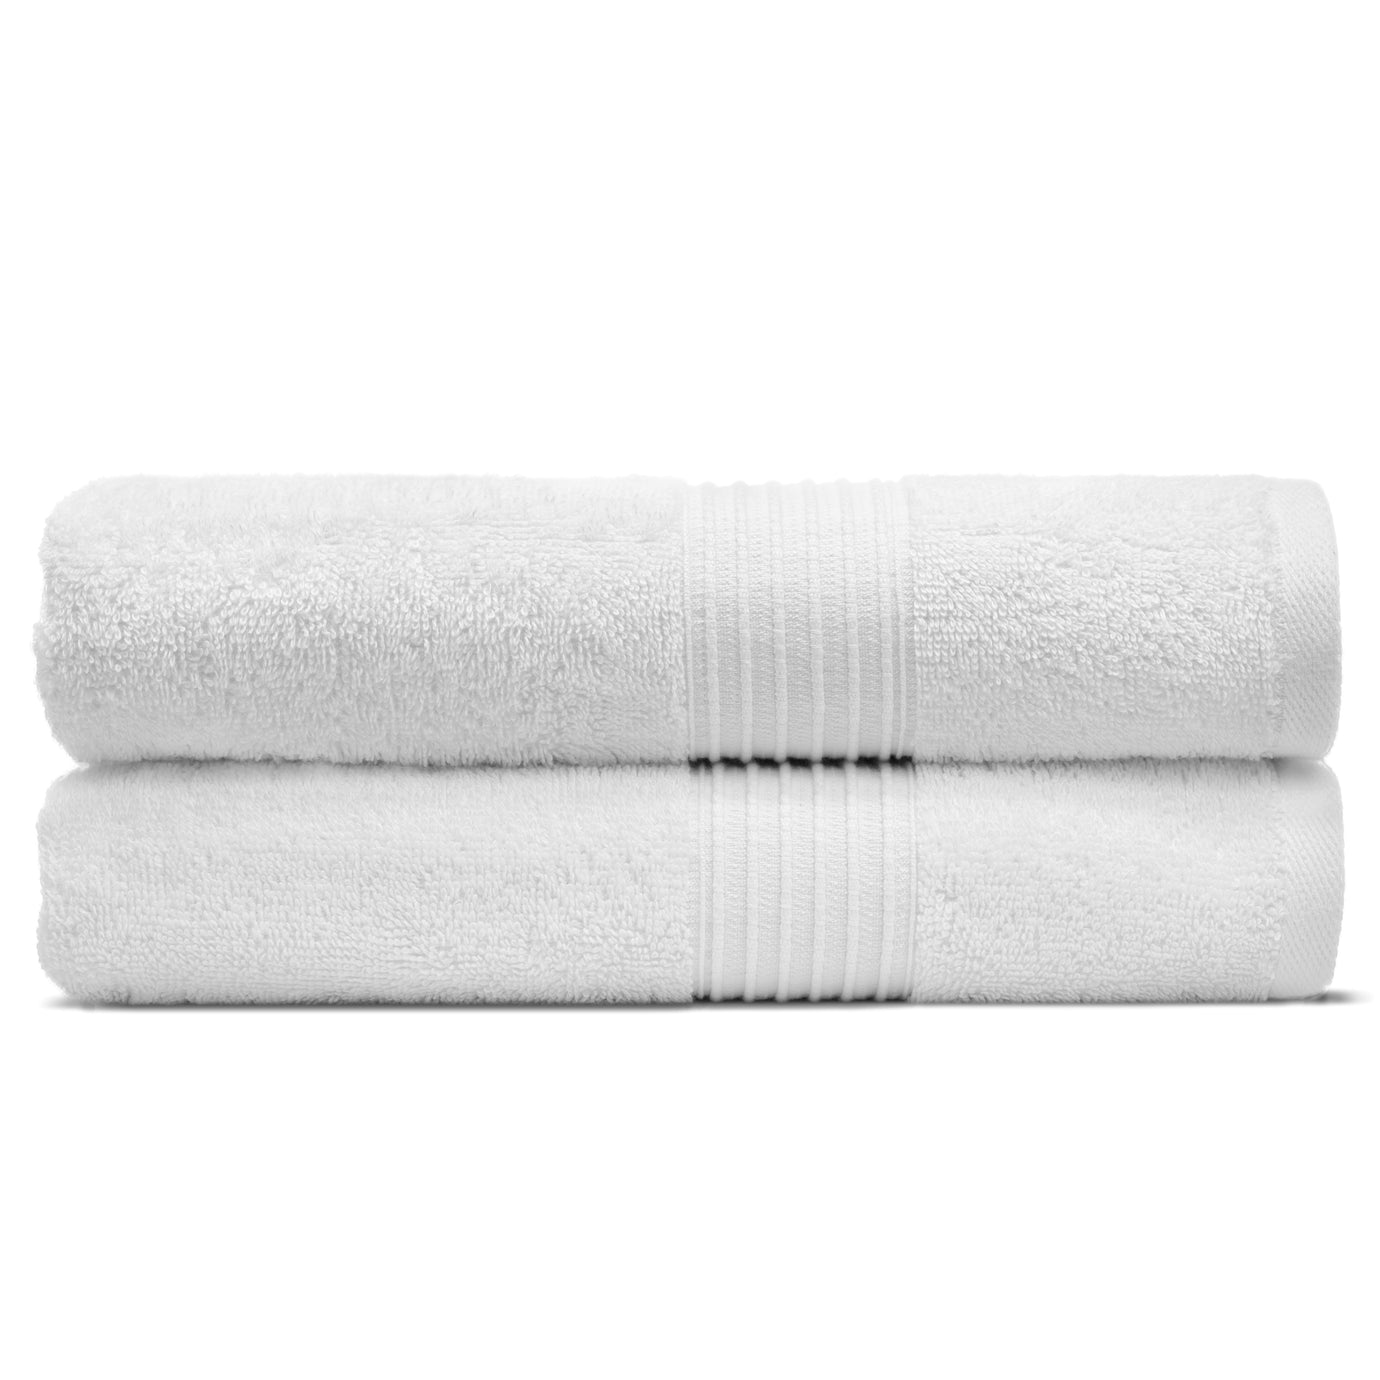 2 Pack Supreme 100% Normal Cotton Face Cloth Towels Small Hand